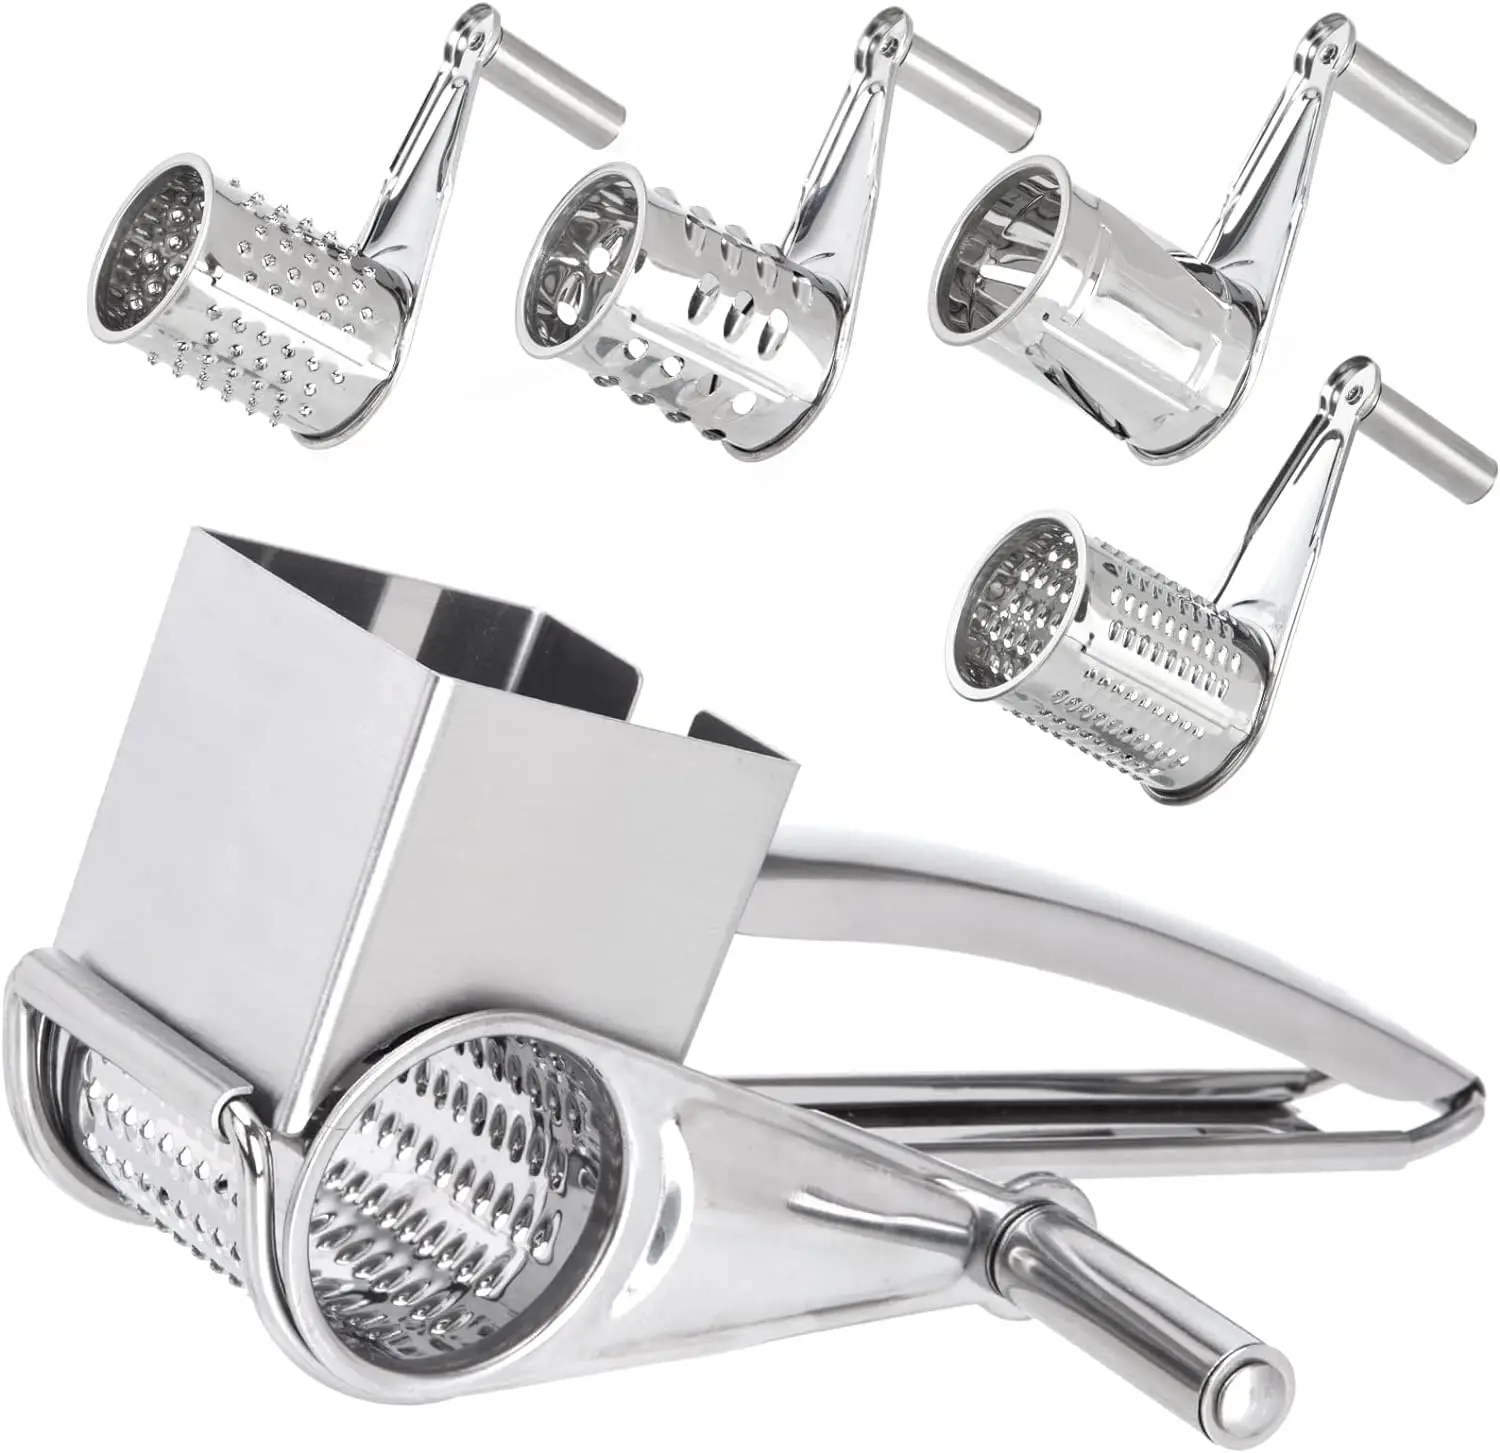 

4 in 1 Rotary Cheese Grater Cheese Cutter Slicer Shredder with 4 Blades and Handle Stainless Steel Manual Handheld Grater